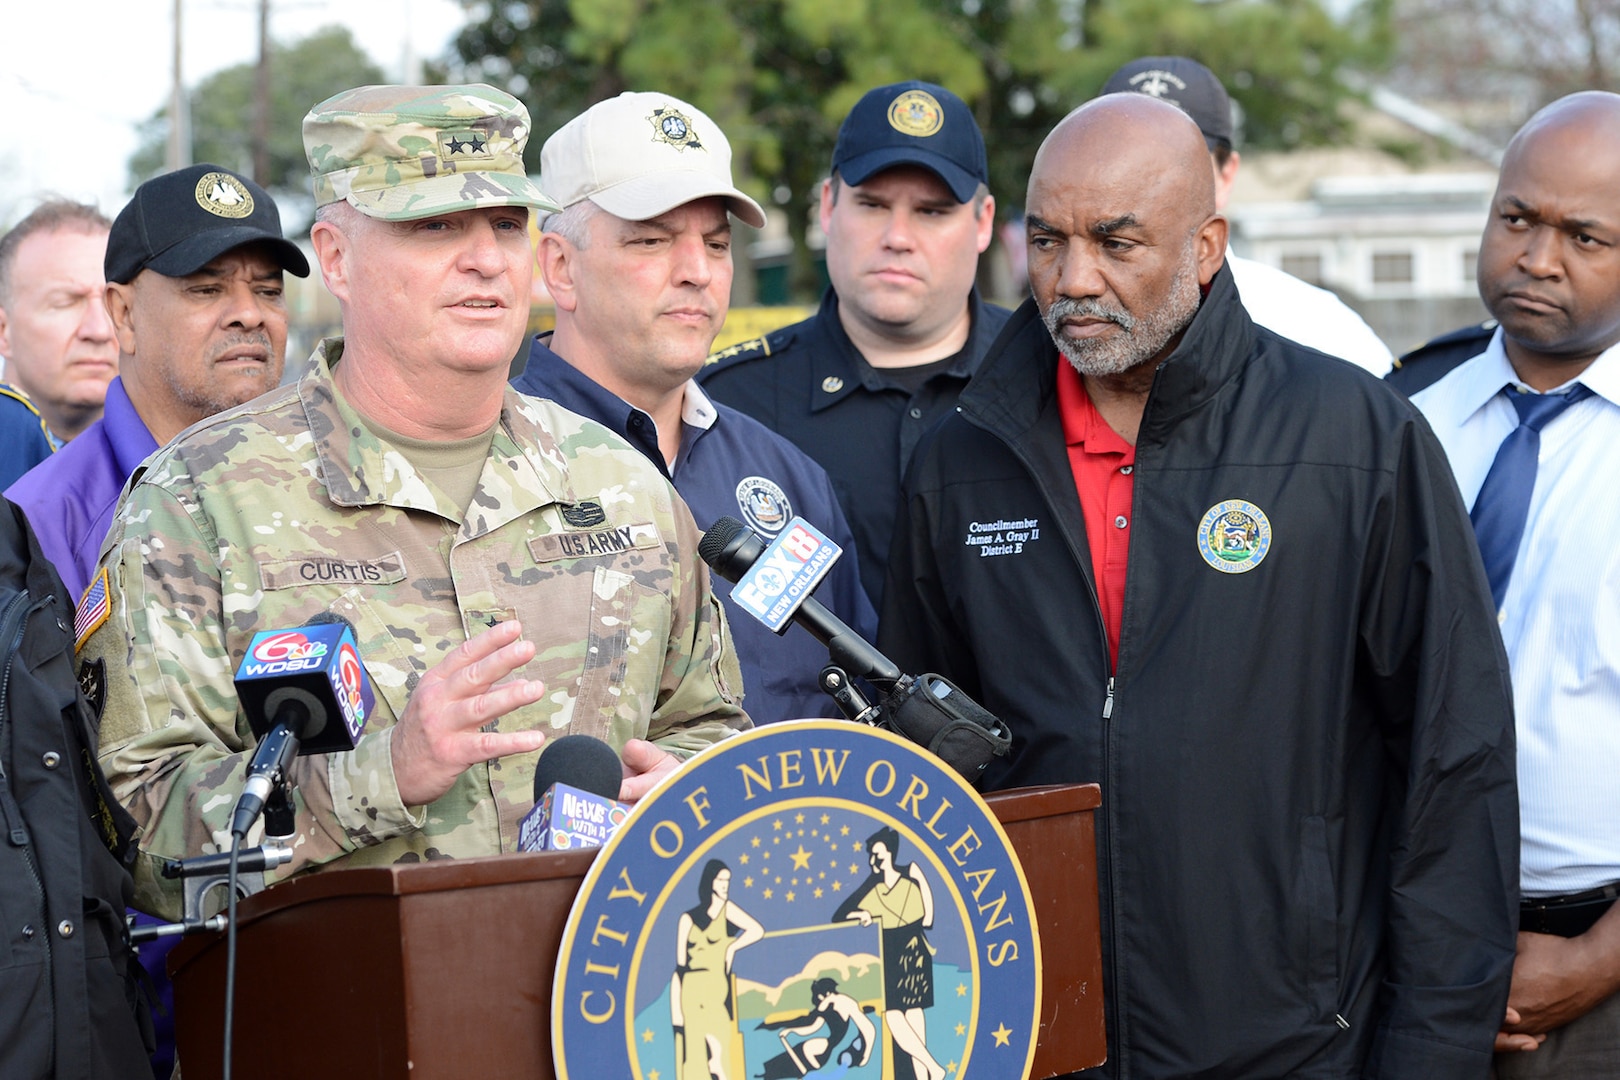 Maj. Gen. Glenn H. Curtis, adjutant general of the Louisiana National Guard, addresses the media on the support that LANG will provide to the city of New Orleans at the direction of Louisiana Governor John Bel Edwards after a tornado hit New Orleans East on Feb. 7, 2017. The LANG mobilized up to 3,000 Soldiers in advance of Tropical Storm Barry, projected to make landfall Friday or Saturday.